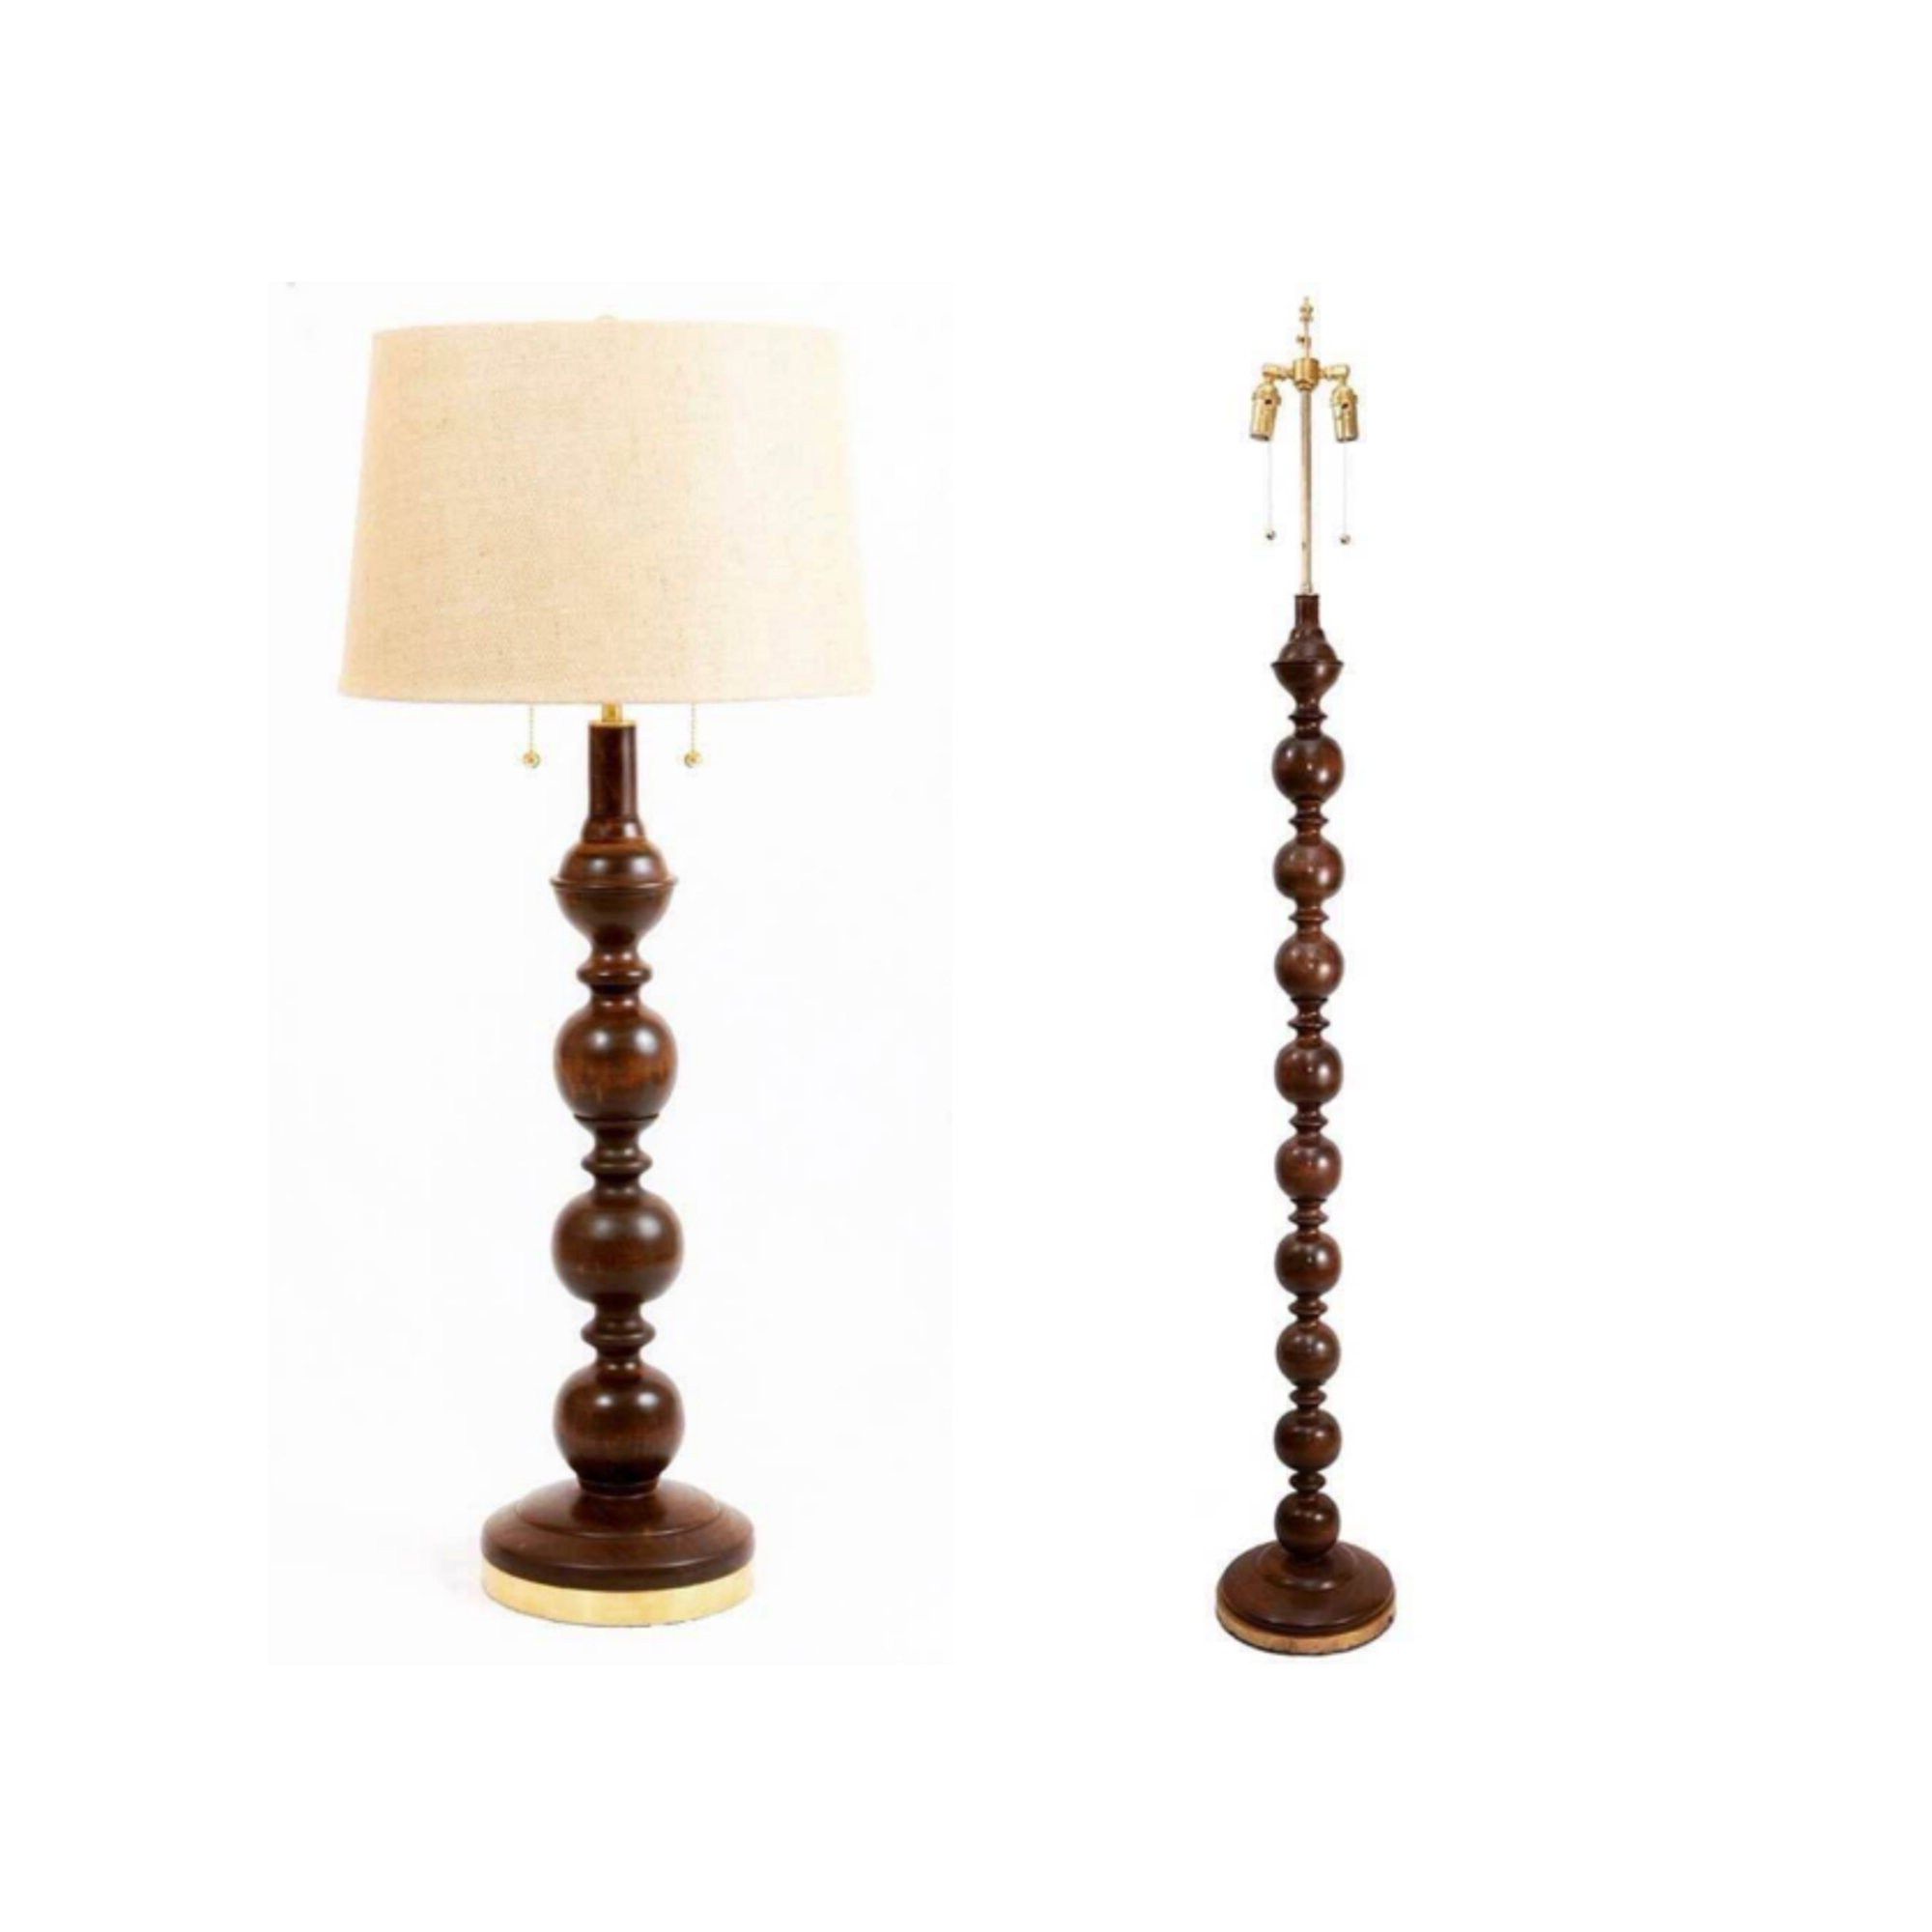 Trendy Cherry Floor And Table Lamp Set 2 Table Lamps 1 Floor Lamp – Etsy With Regard To Beeswax Finish Floor Lamps (View 14 of 15)